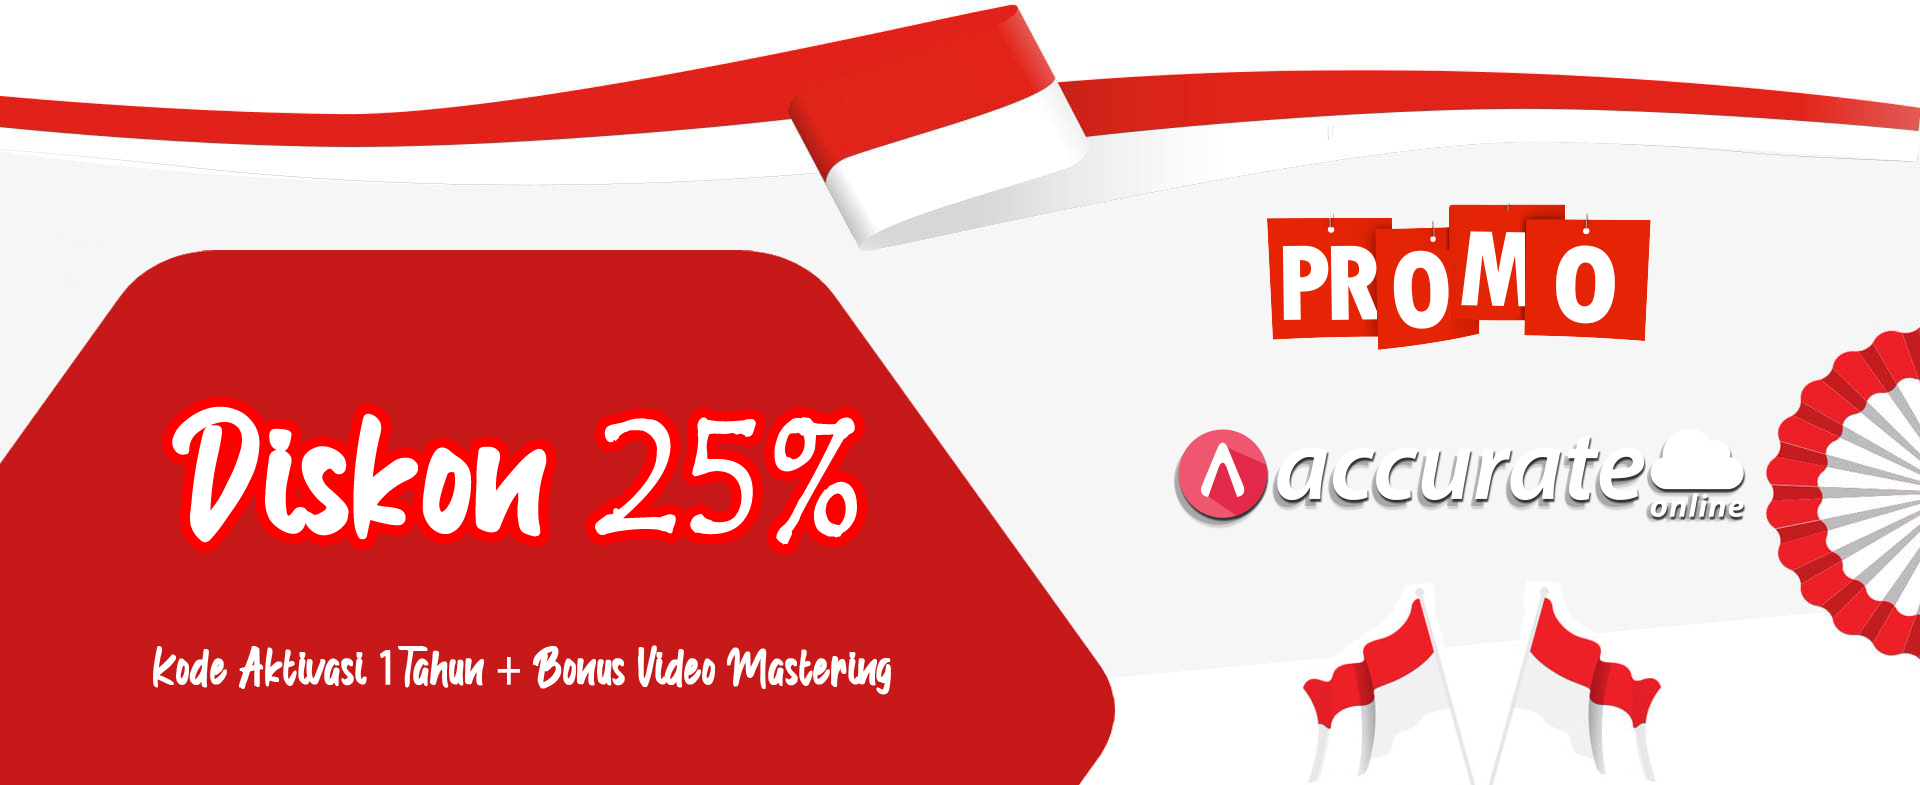 promo accurate online 25%